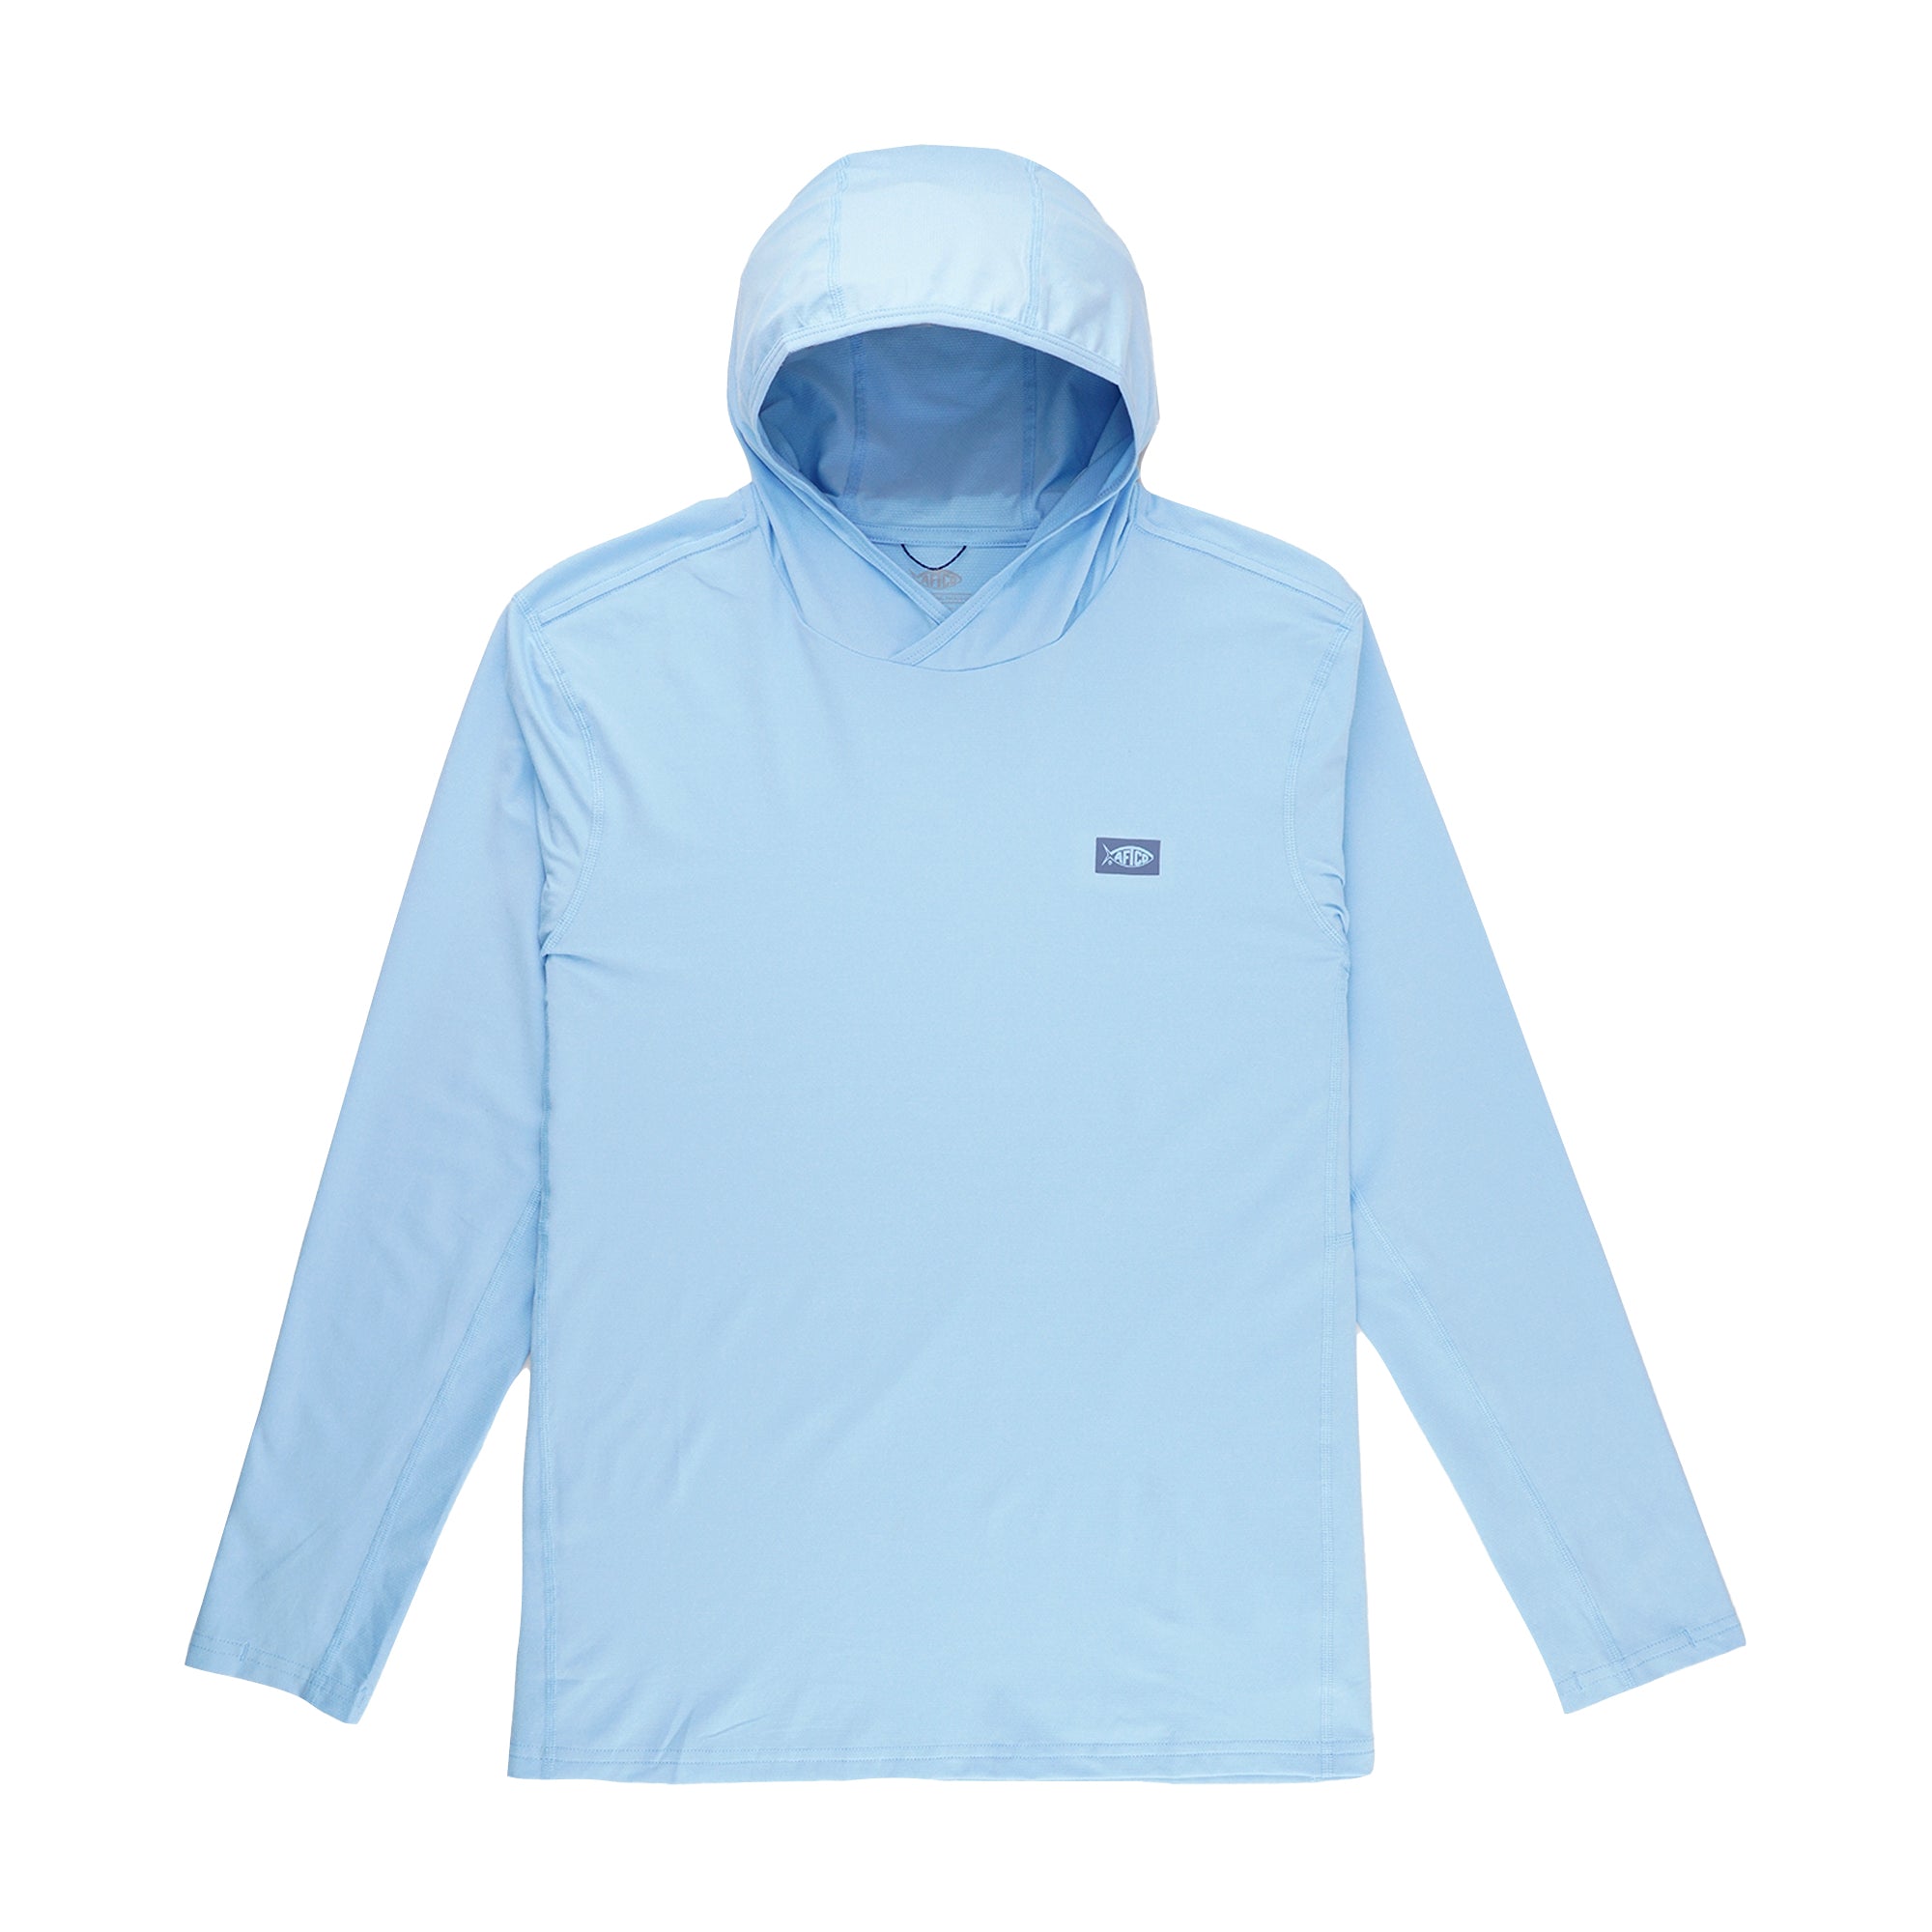 aftco hooded fishing shirt,SAVE 29% 